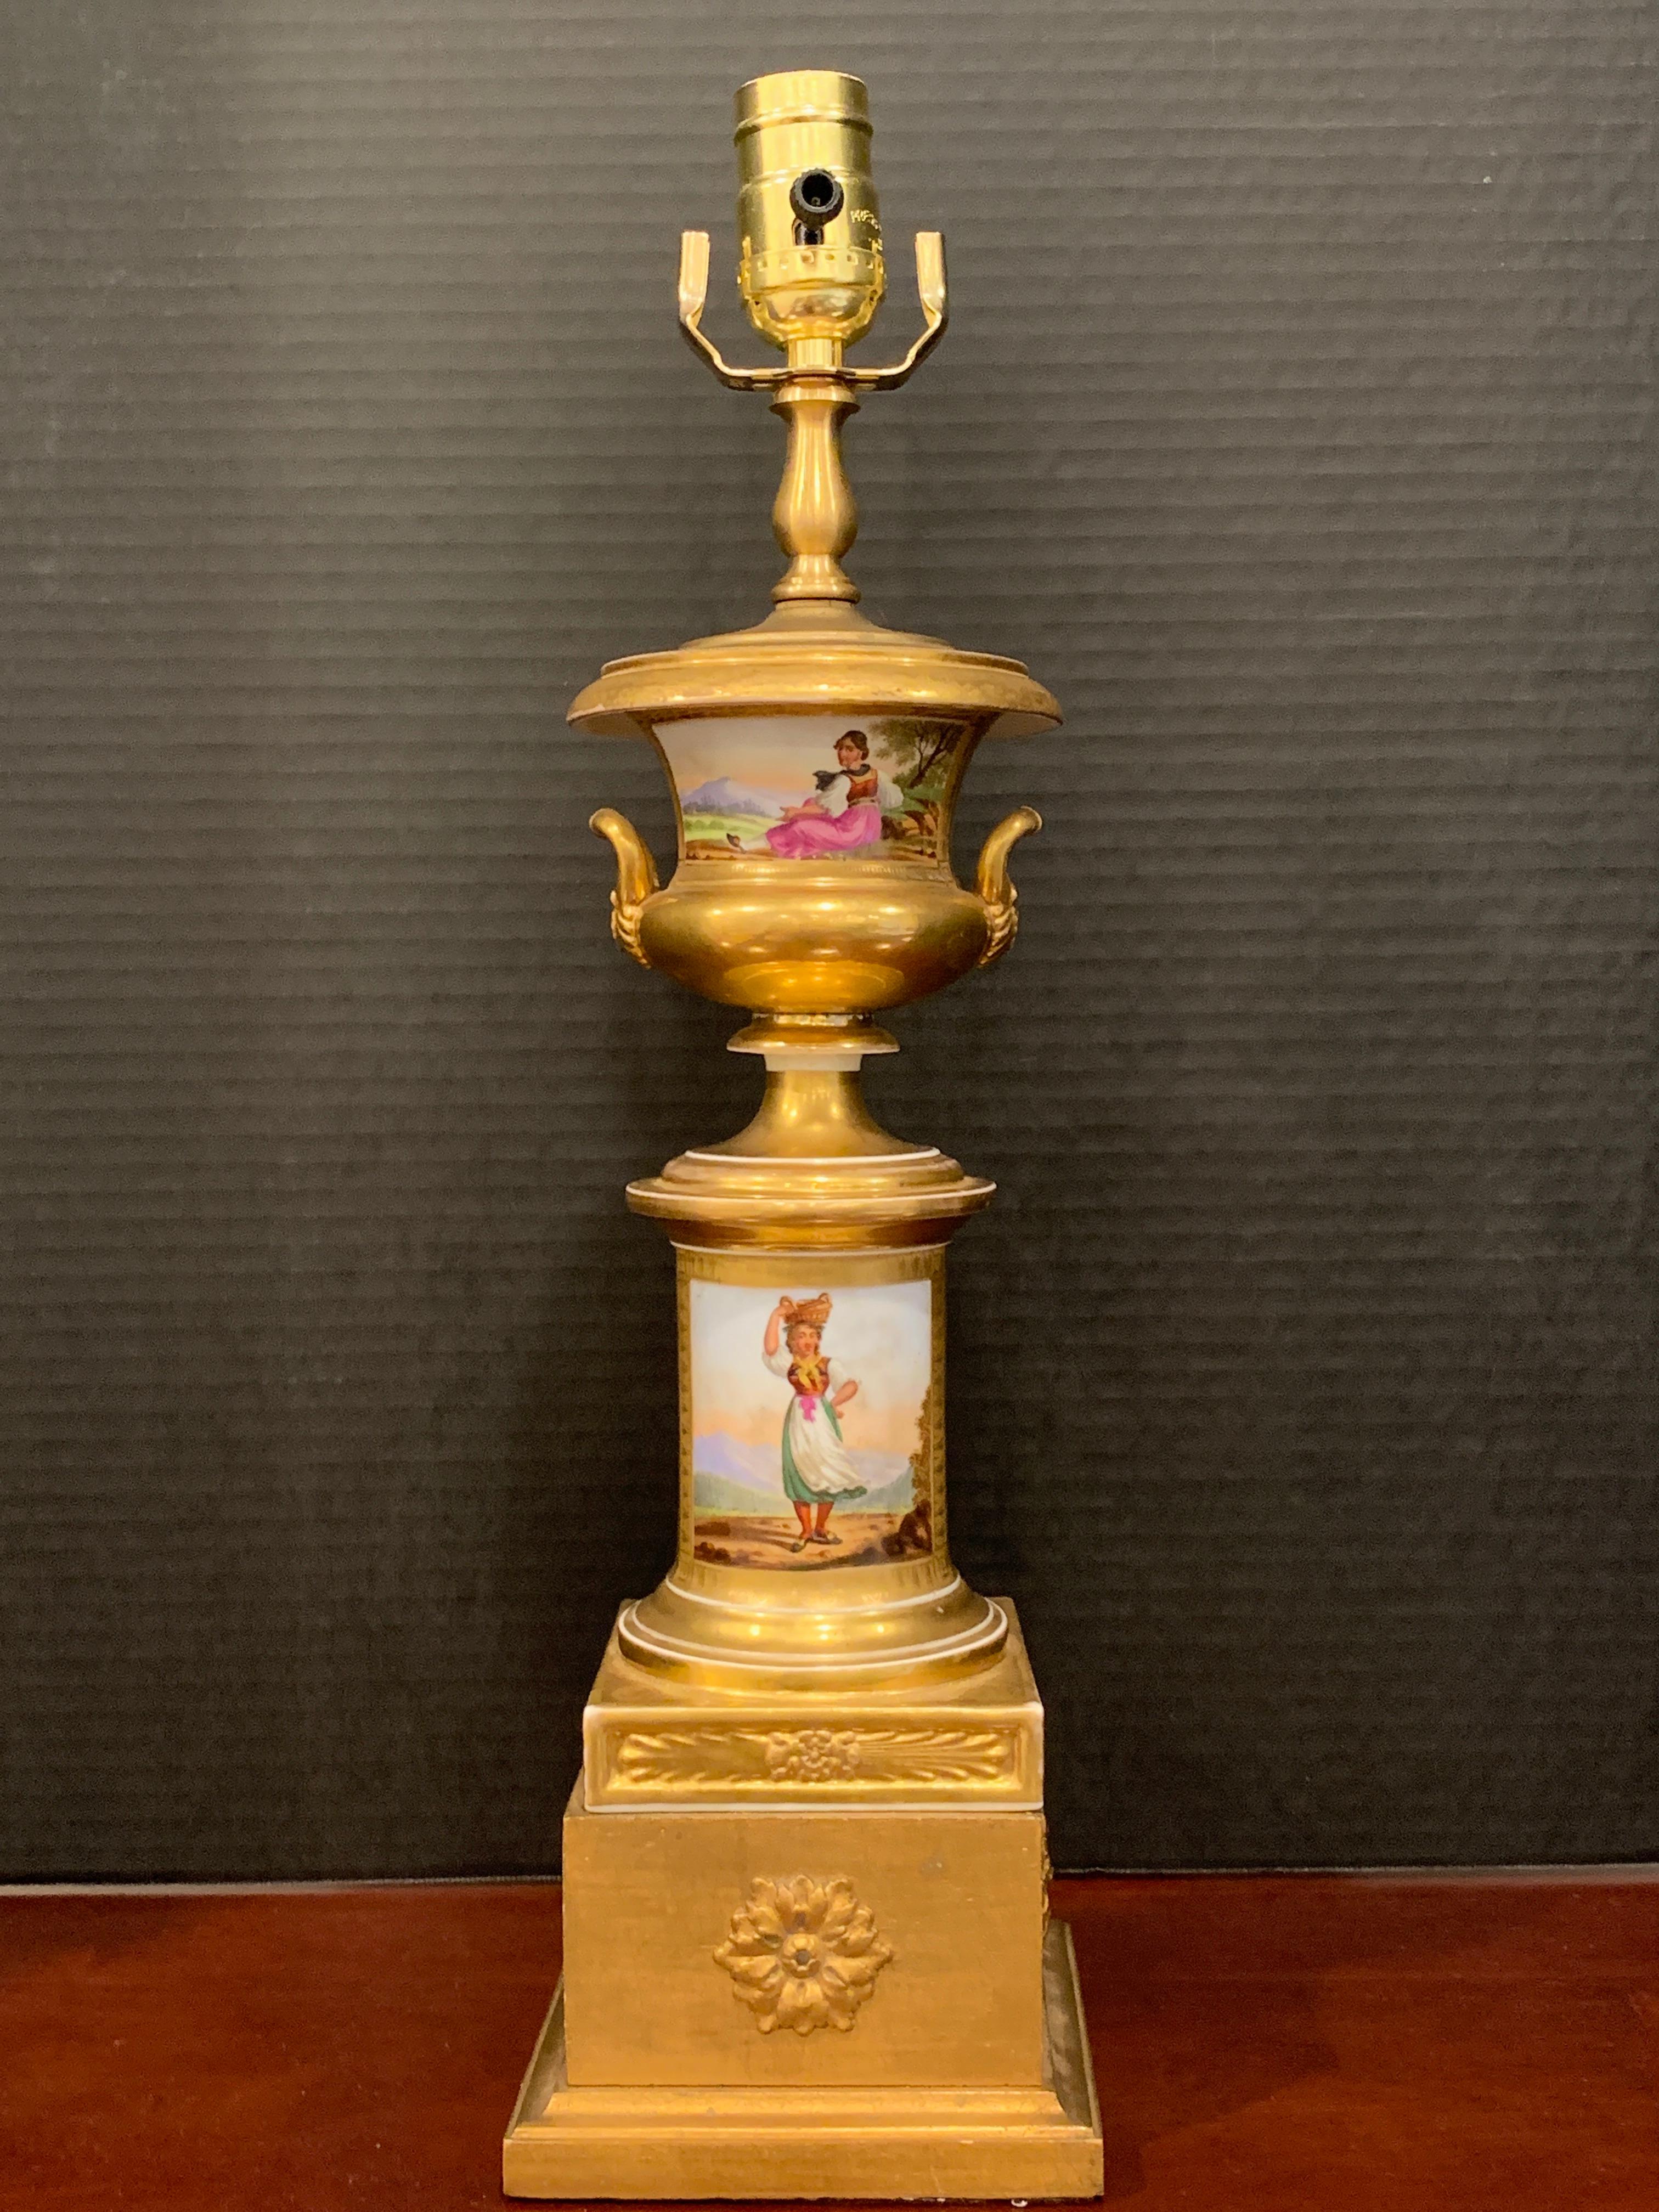 Old Paris Tyrollian fashion motif Campana urn, now as a lamp
The upper part depicting a dressed seated maiden in landscape, the lower section with a standing model with a basket in landscape, with gilt enamel medallions on the back. New